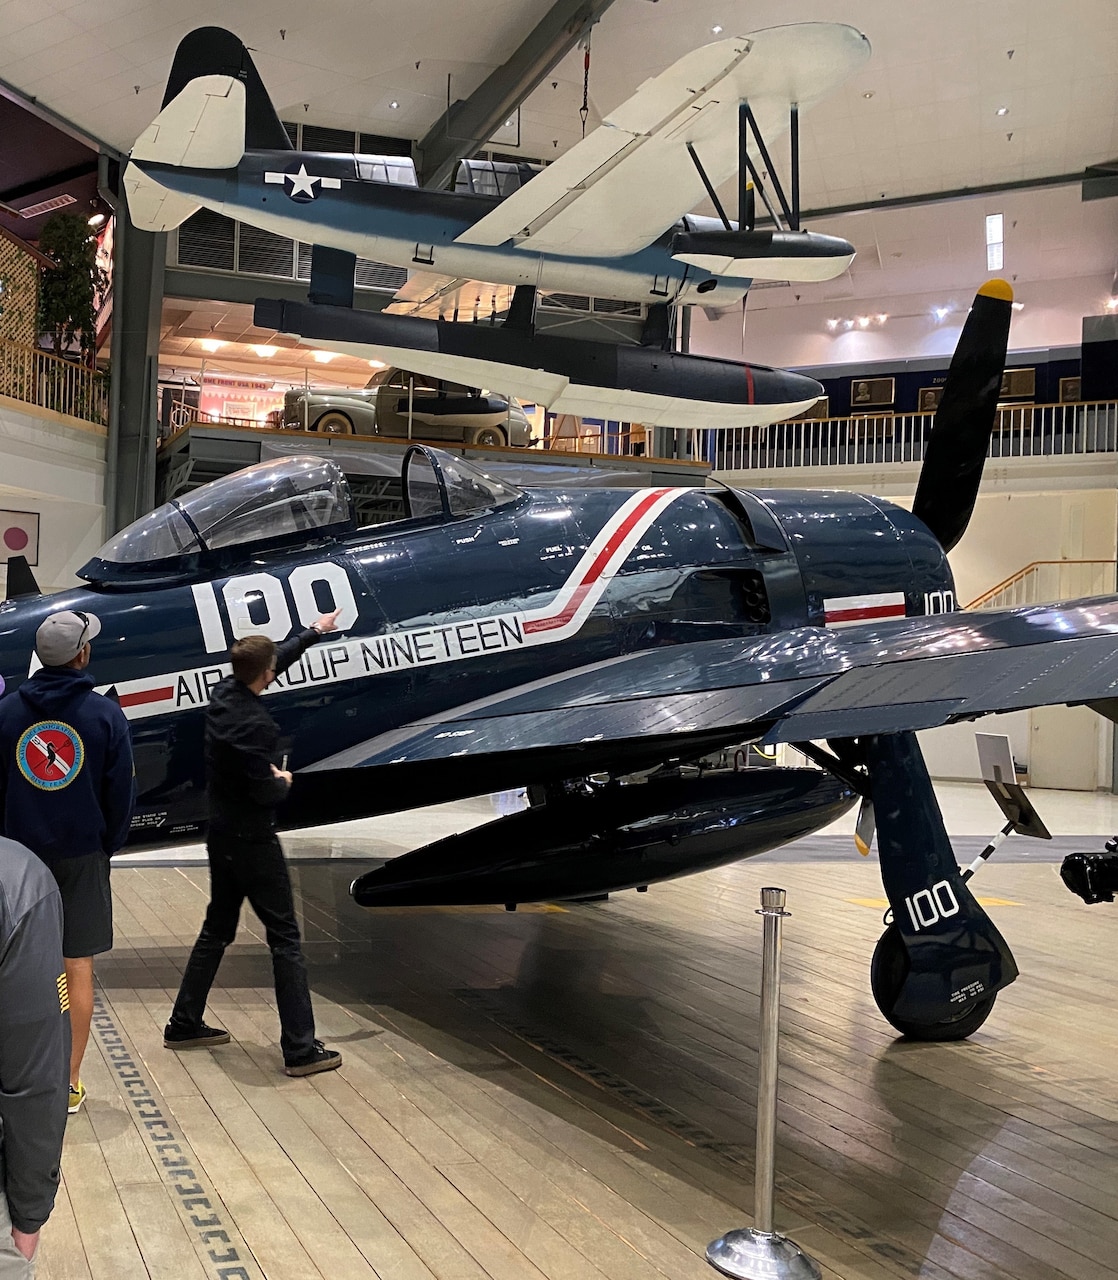 Navy dive team examining features of the existing F8F Bearcat on display at the National Naval Aviation Museum